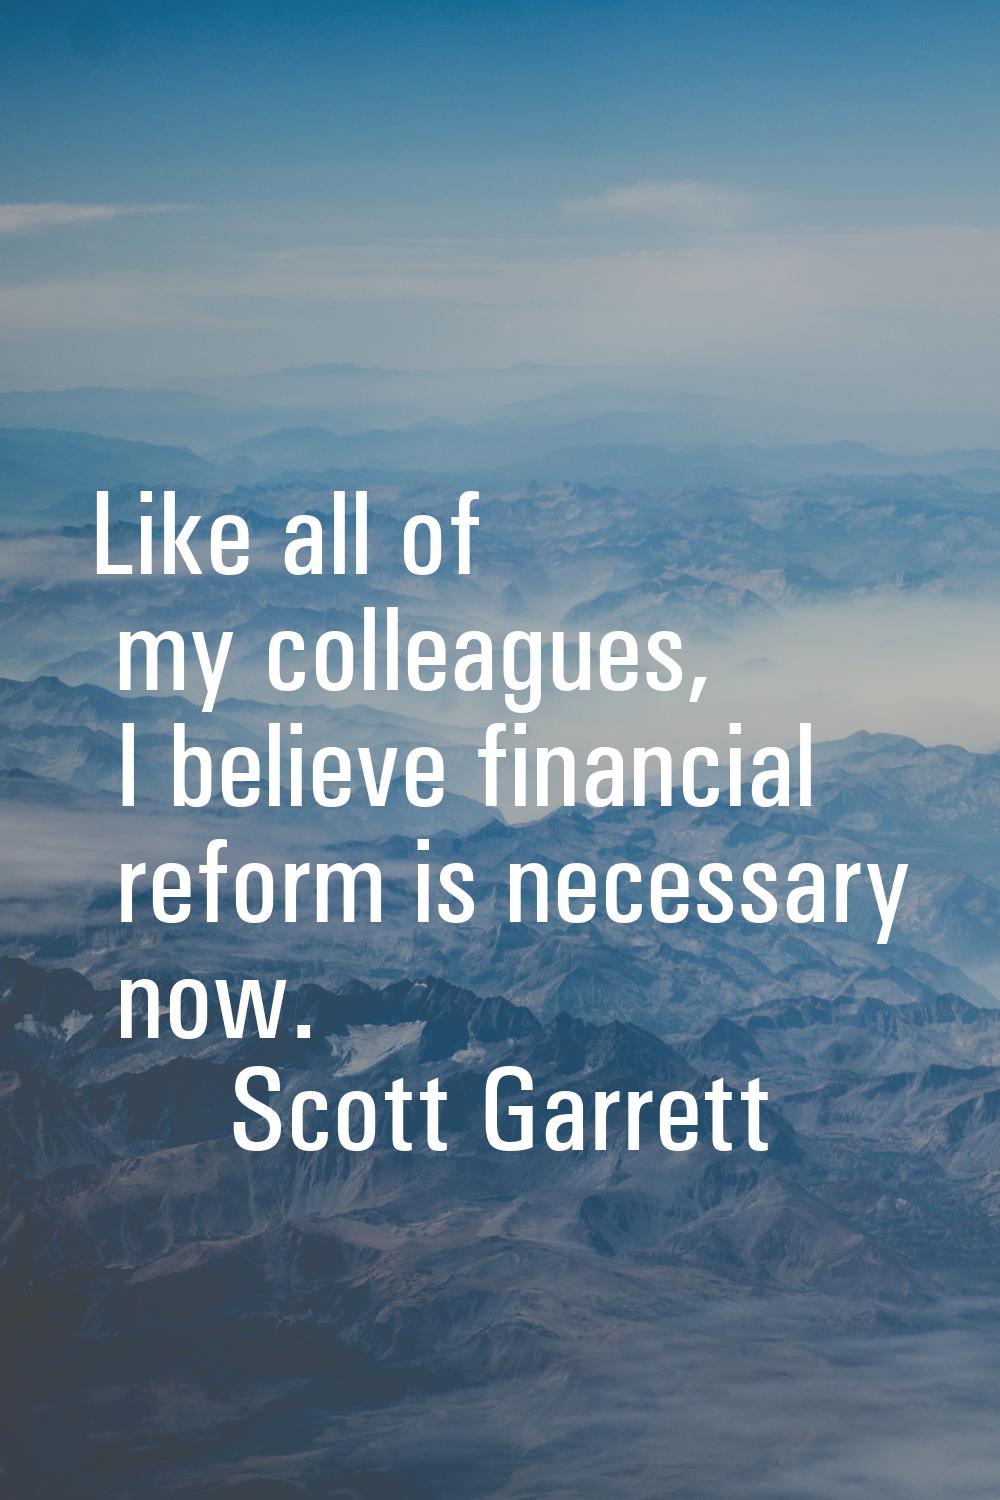 Like all of my colleagues, I believe financial reform is necessary now.